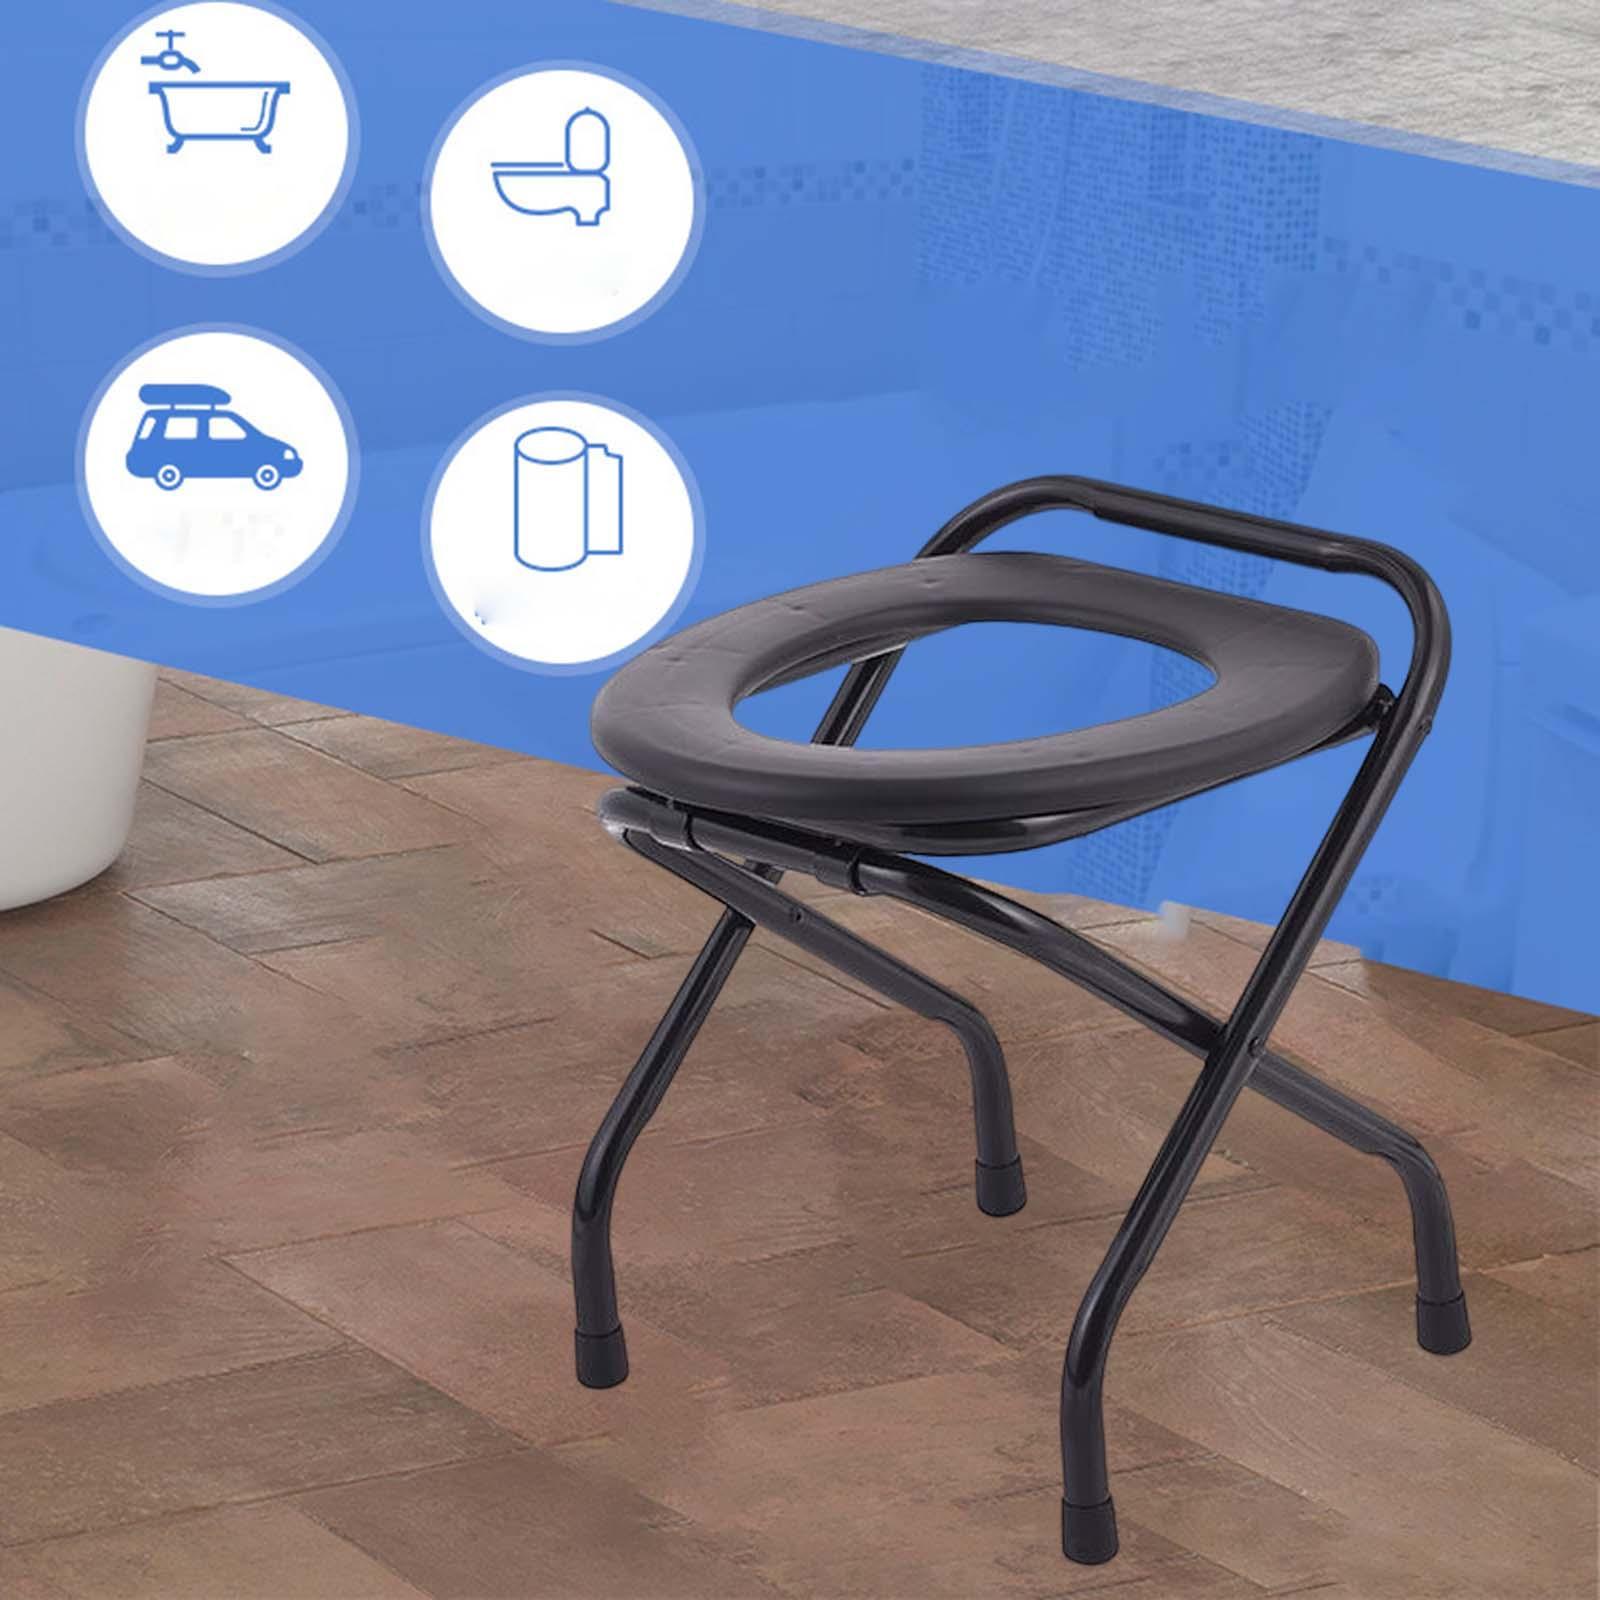 Squatting Toilet Stool Chairs Moveable Washable Stable for Toilet Bathroom